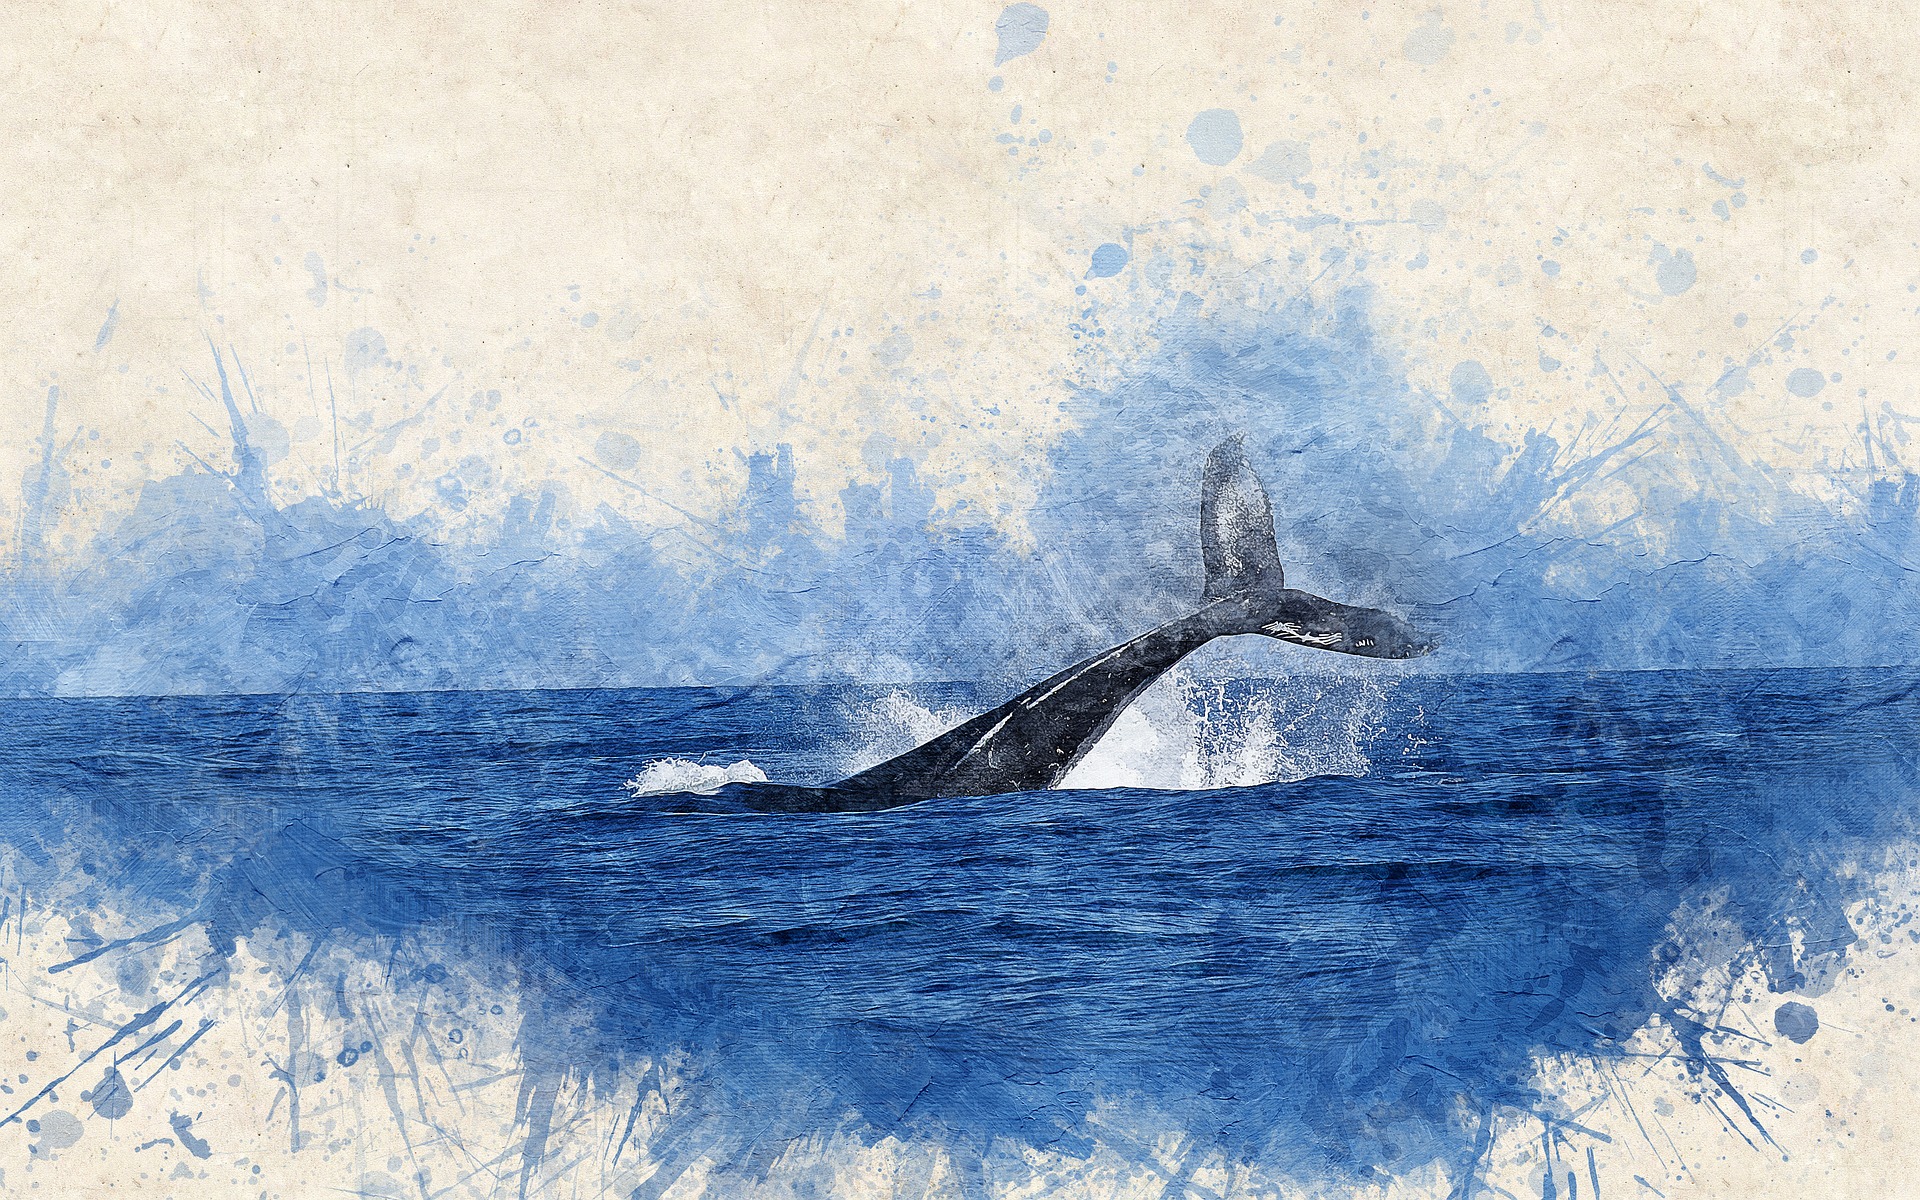 Discover the Finest Whale Books Today!